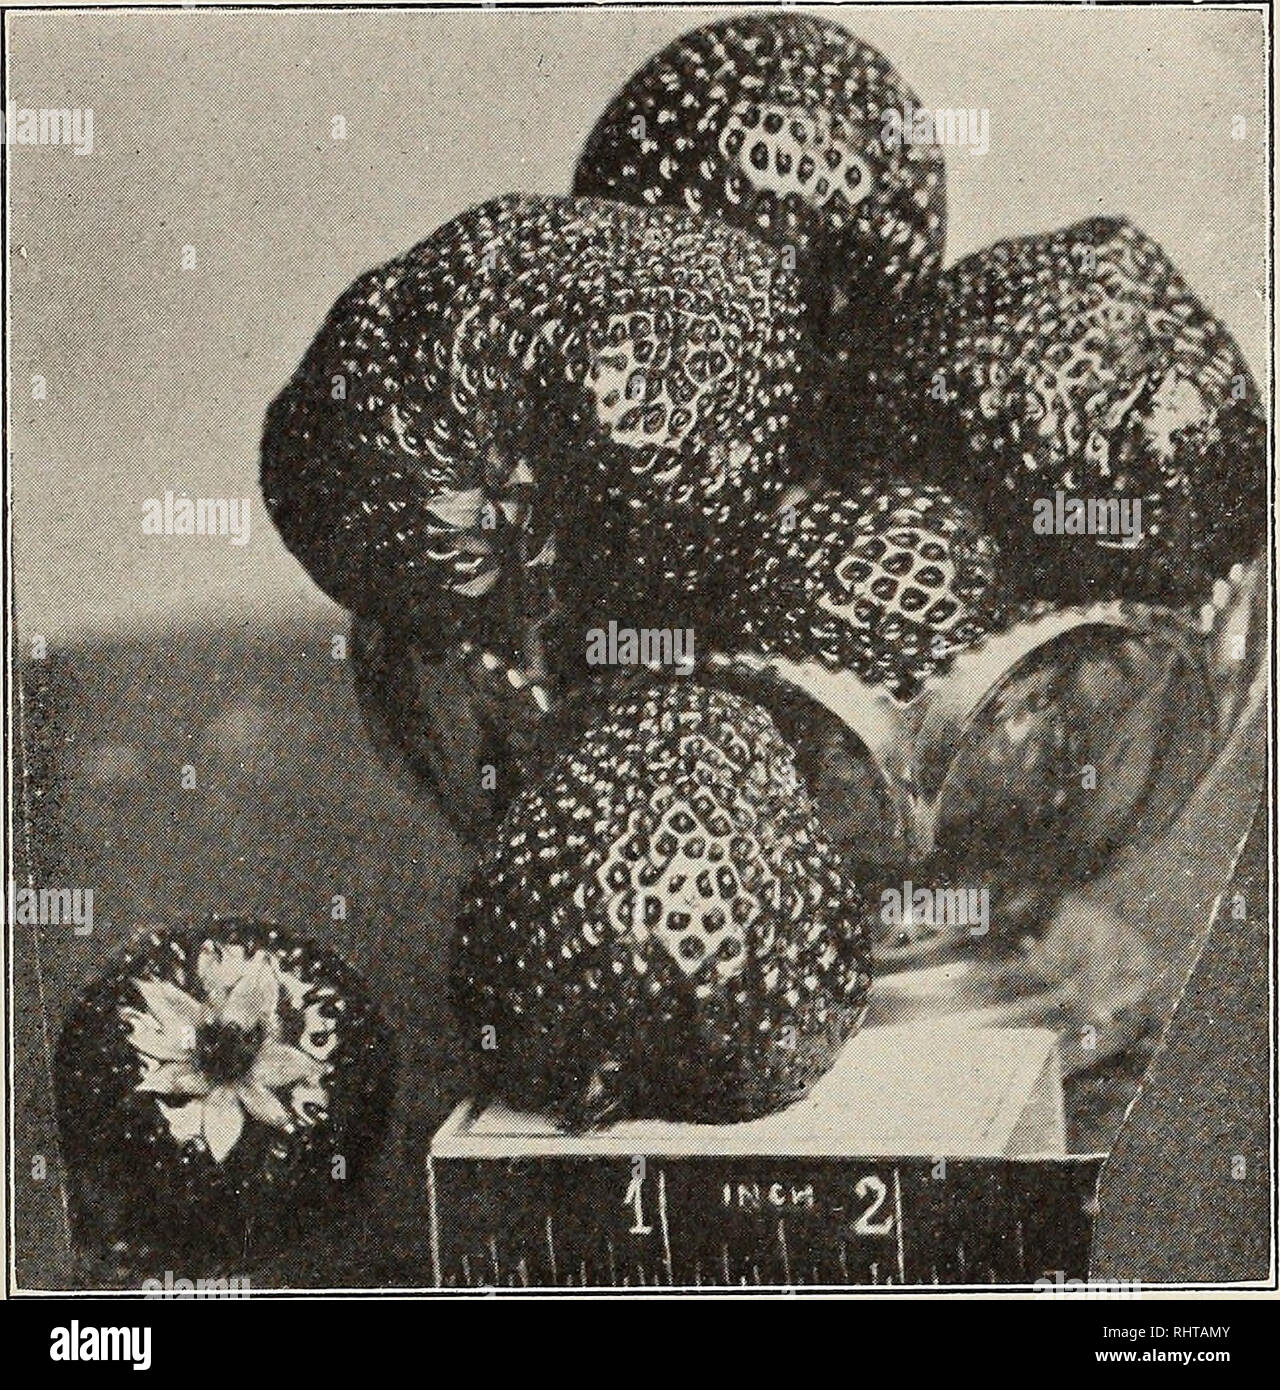 . Better fruit. Fruit-culture. igii BETTER FRUIT Page 57 THE SUNNYSIDE NURSERY CO., Sunnyside, Washington o o 3 O. GOODELL BERRY This is the greatest of all known varieties; has color, sweetness and aroma ot wild berry; yield Immense, $500 worth of berries marketed from half acre. Write for circular and prices on our nursery stock. We are the people who save you the money. The live wire nursery. Prepare to be shocked by our low prices Surplus List APPLE Rome Beauty 114,275 Winesap 141,83.S Stayman Winesap 17,064 Newtown Pippin 106,278 Jonathan 140,212 Wagener 57,690 Delicious 25,499 Grimes Gol Stock Photo